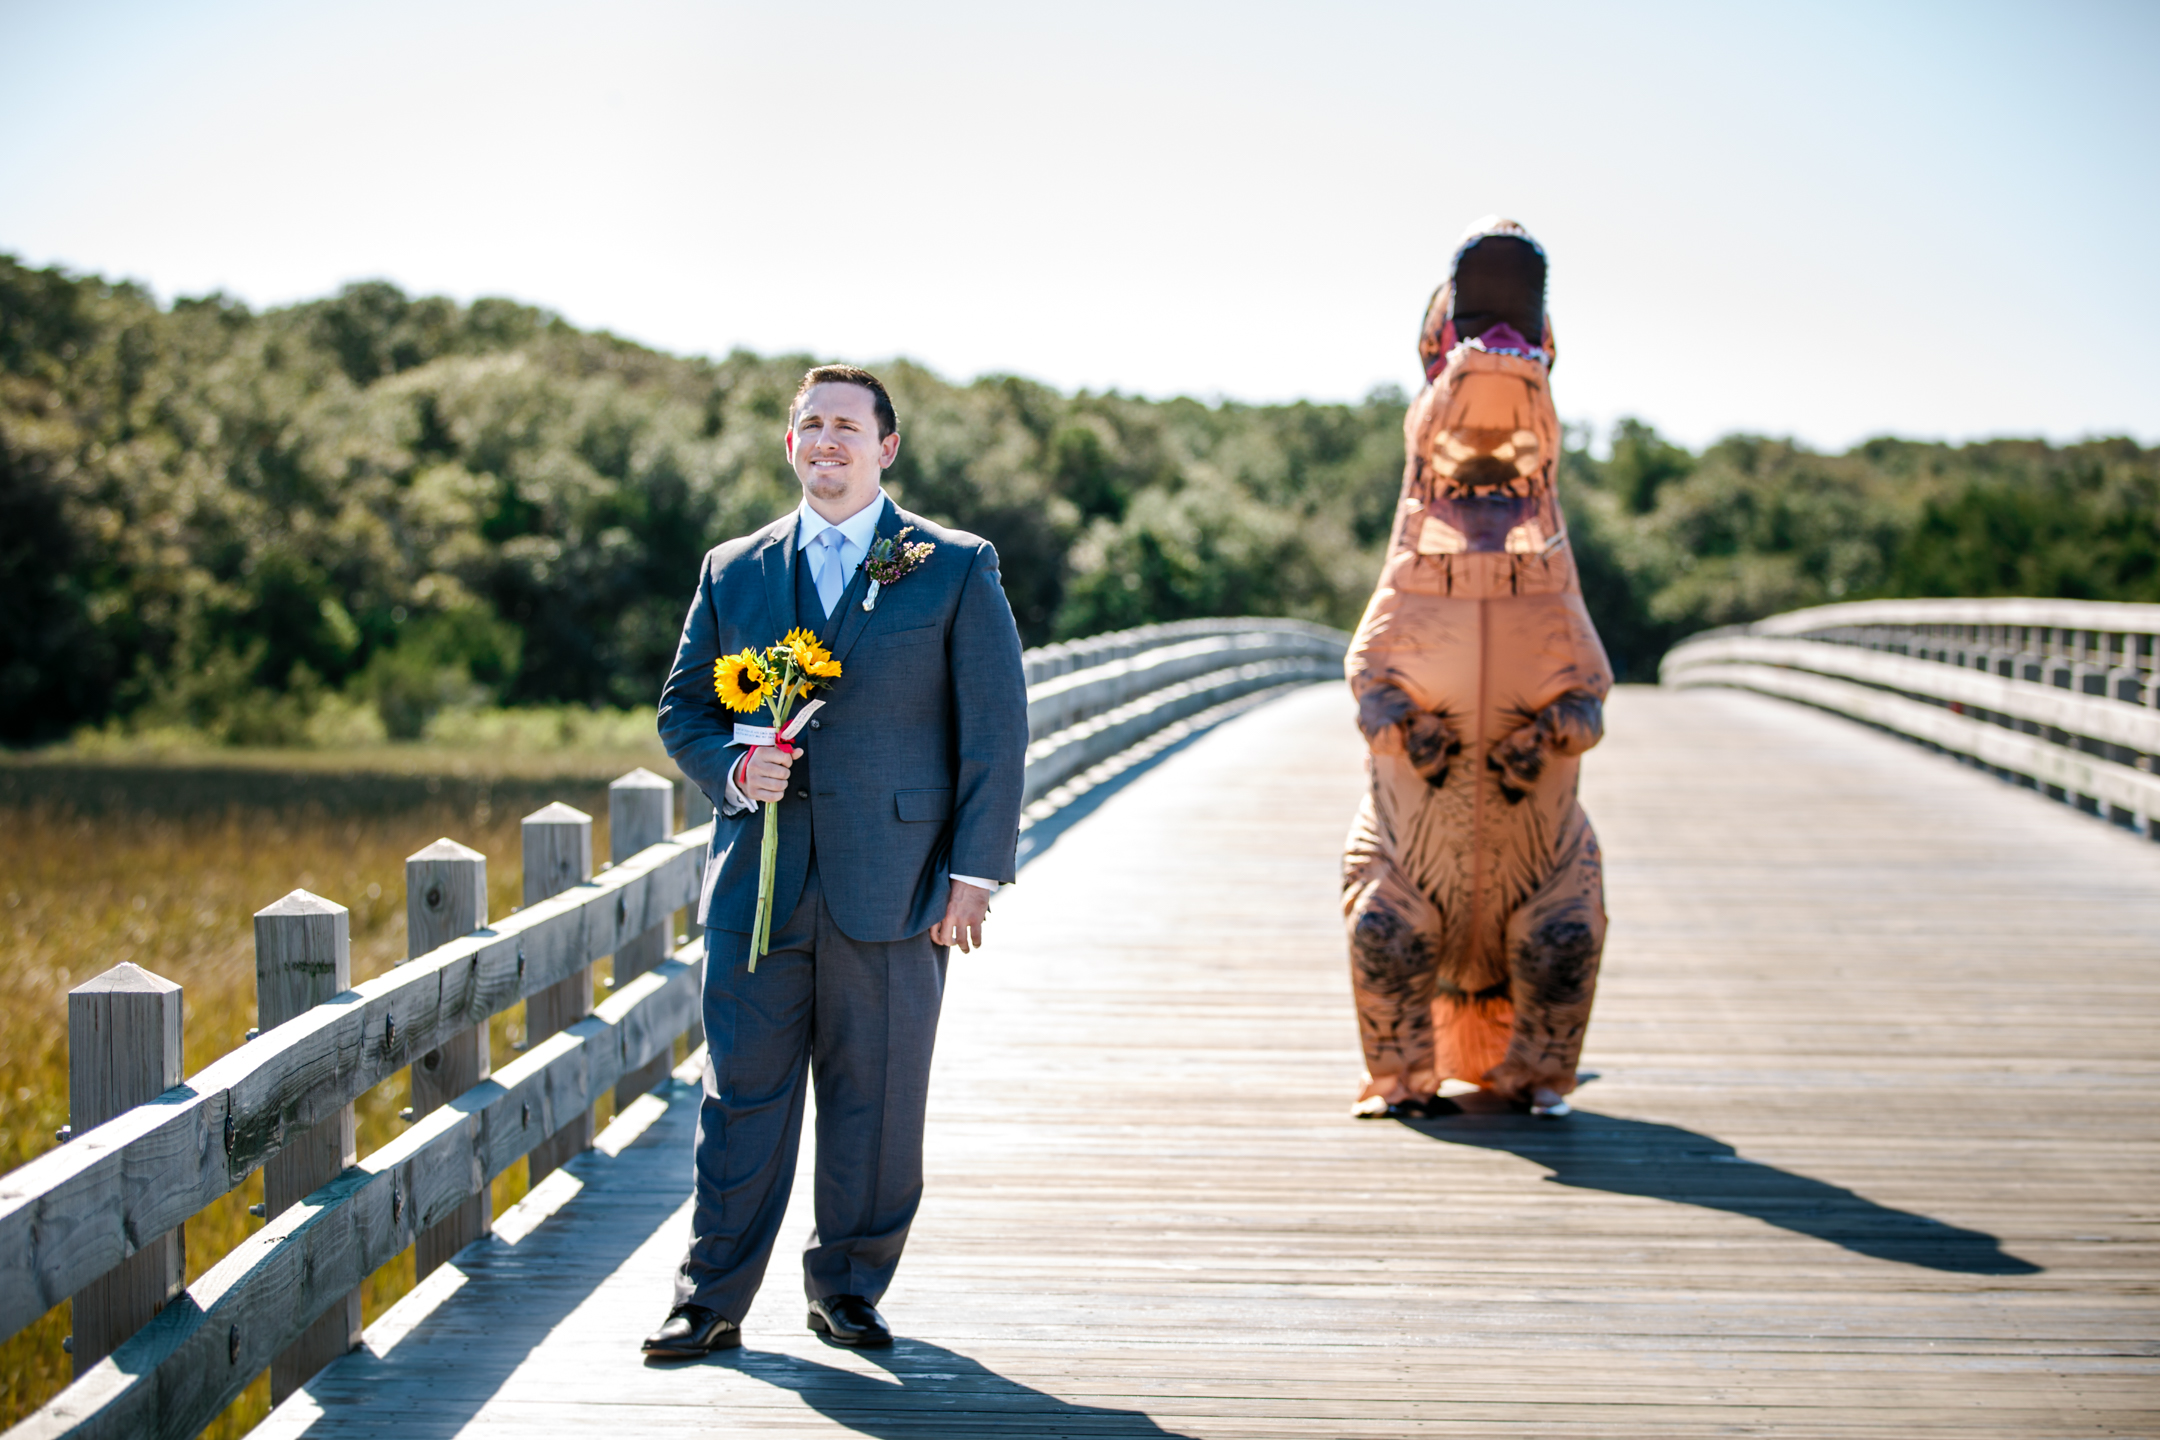 PHOTO: Bride surprises groom in T-Rex costume at the first look before their Nov. 5, 2016 wedding.
